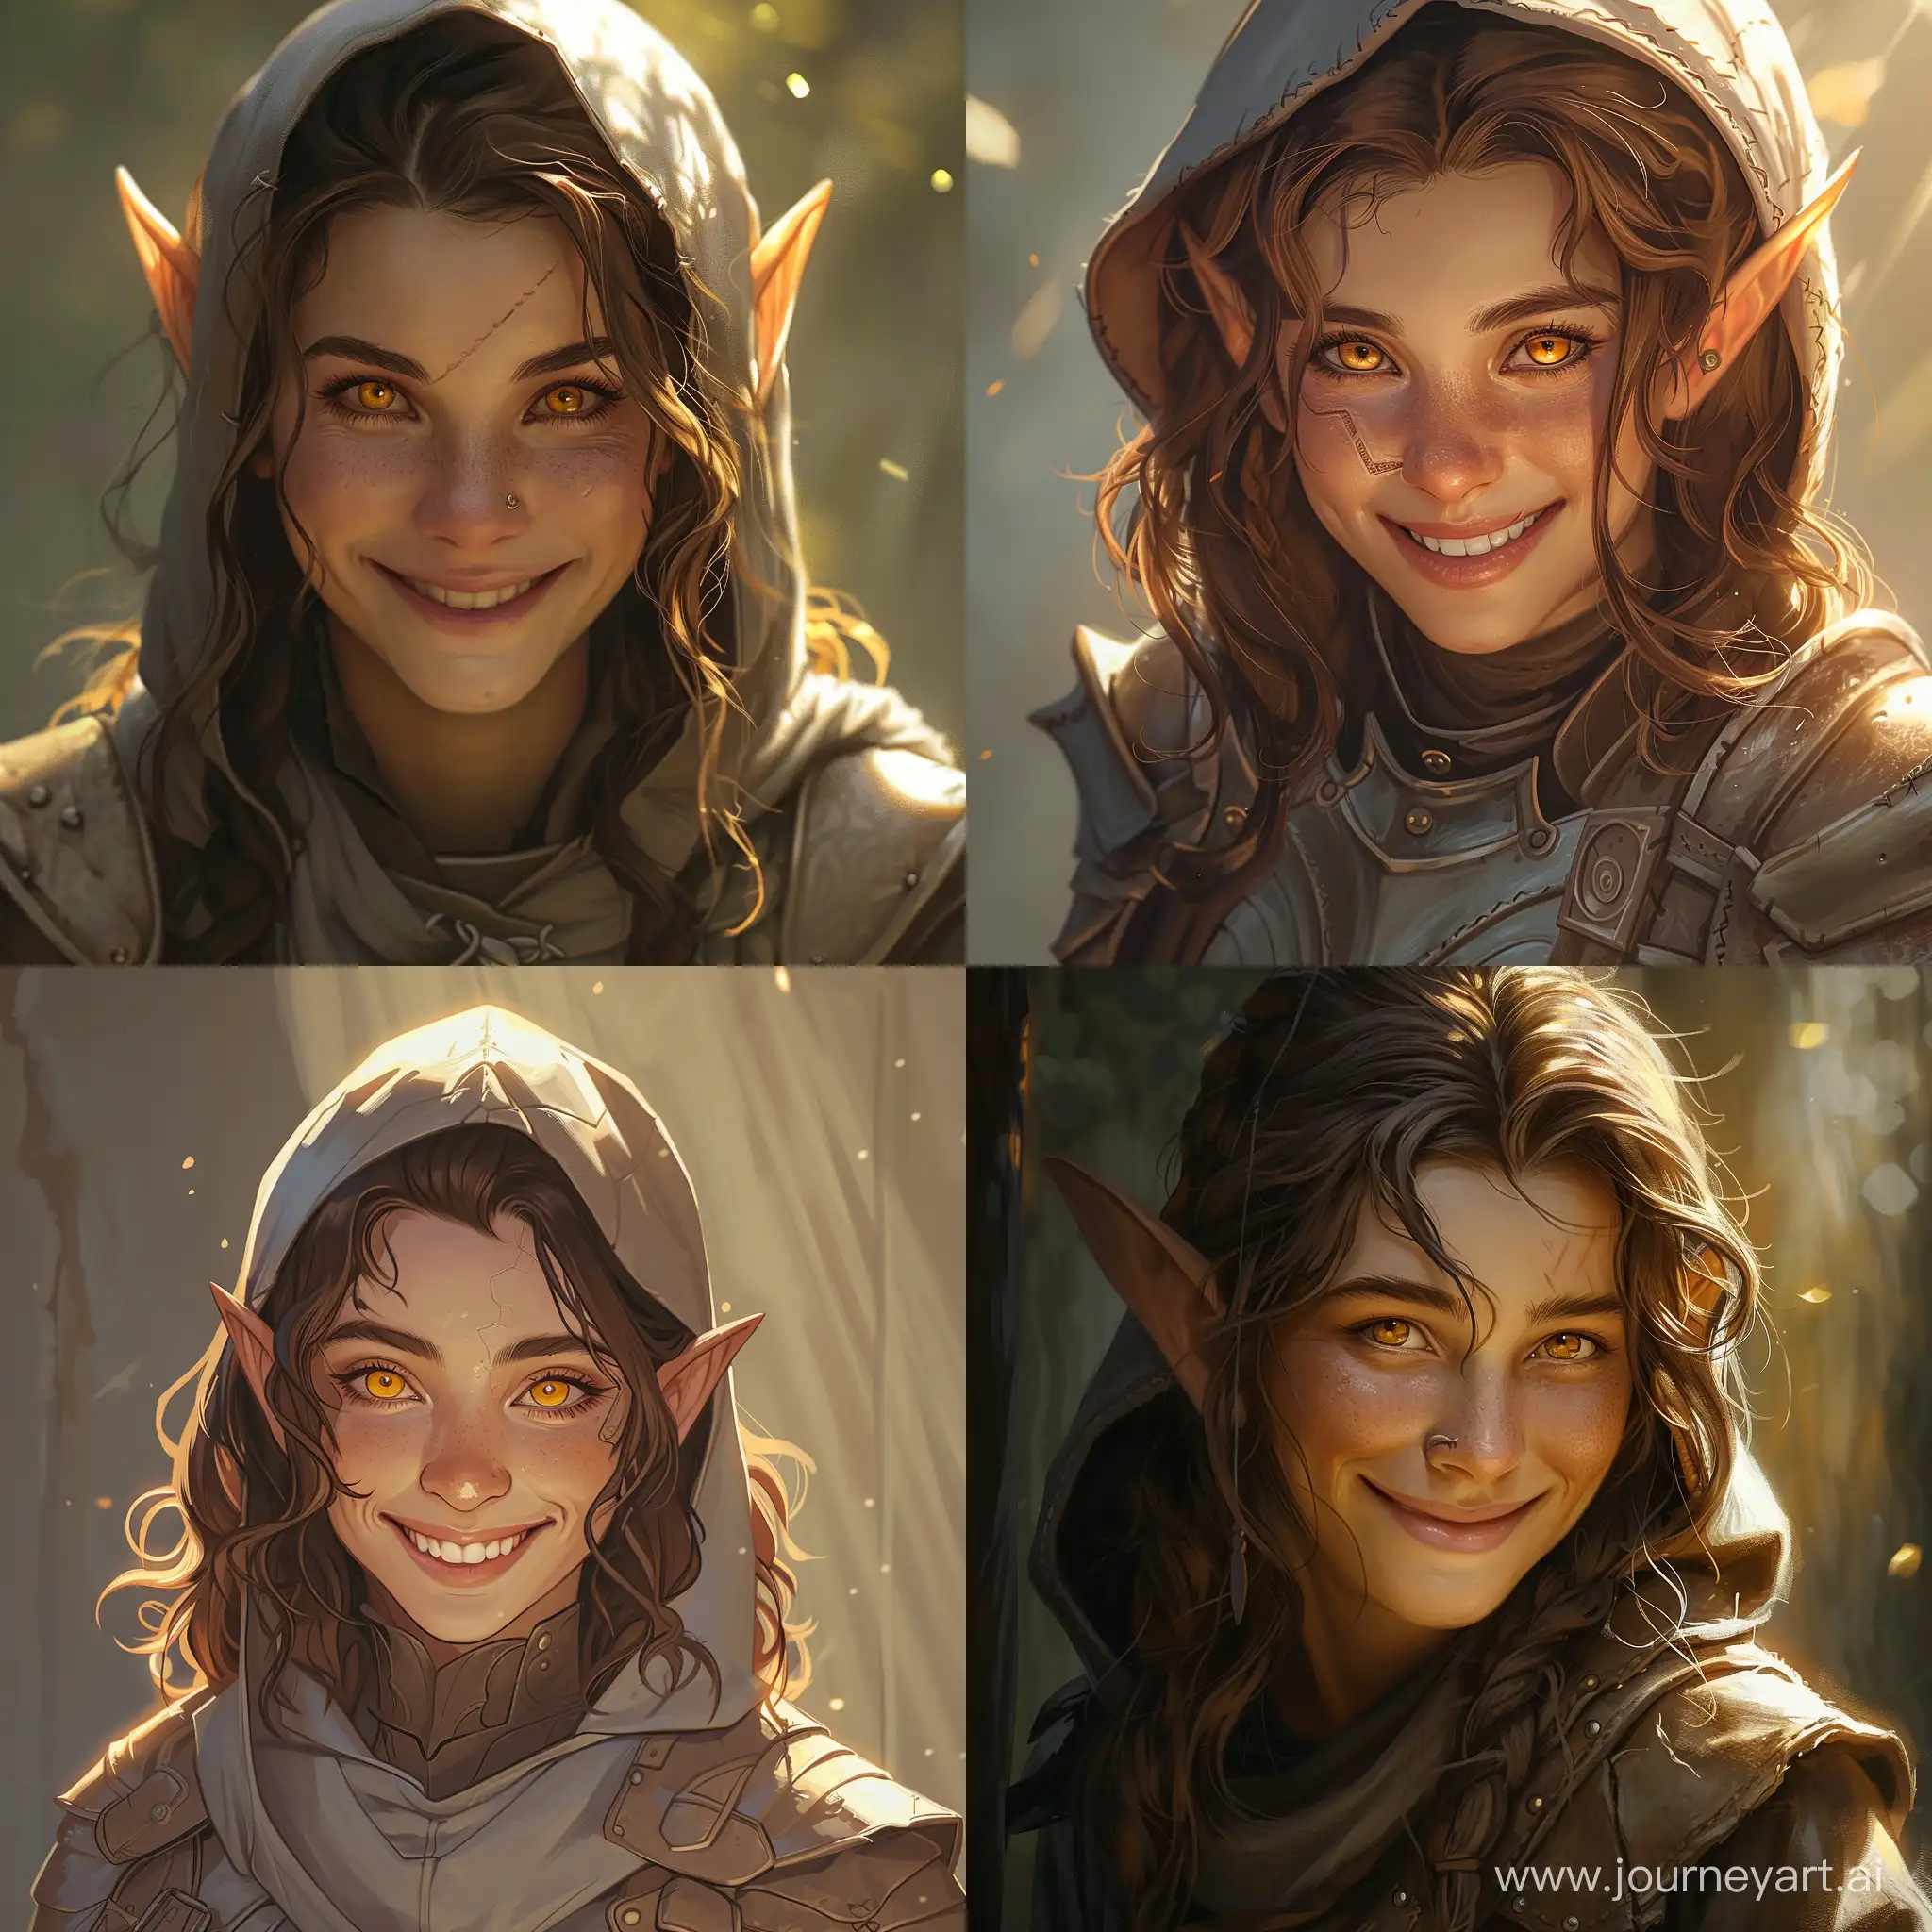 Cheerful-Brownhaired-Elf-in-Sunlit-Armor